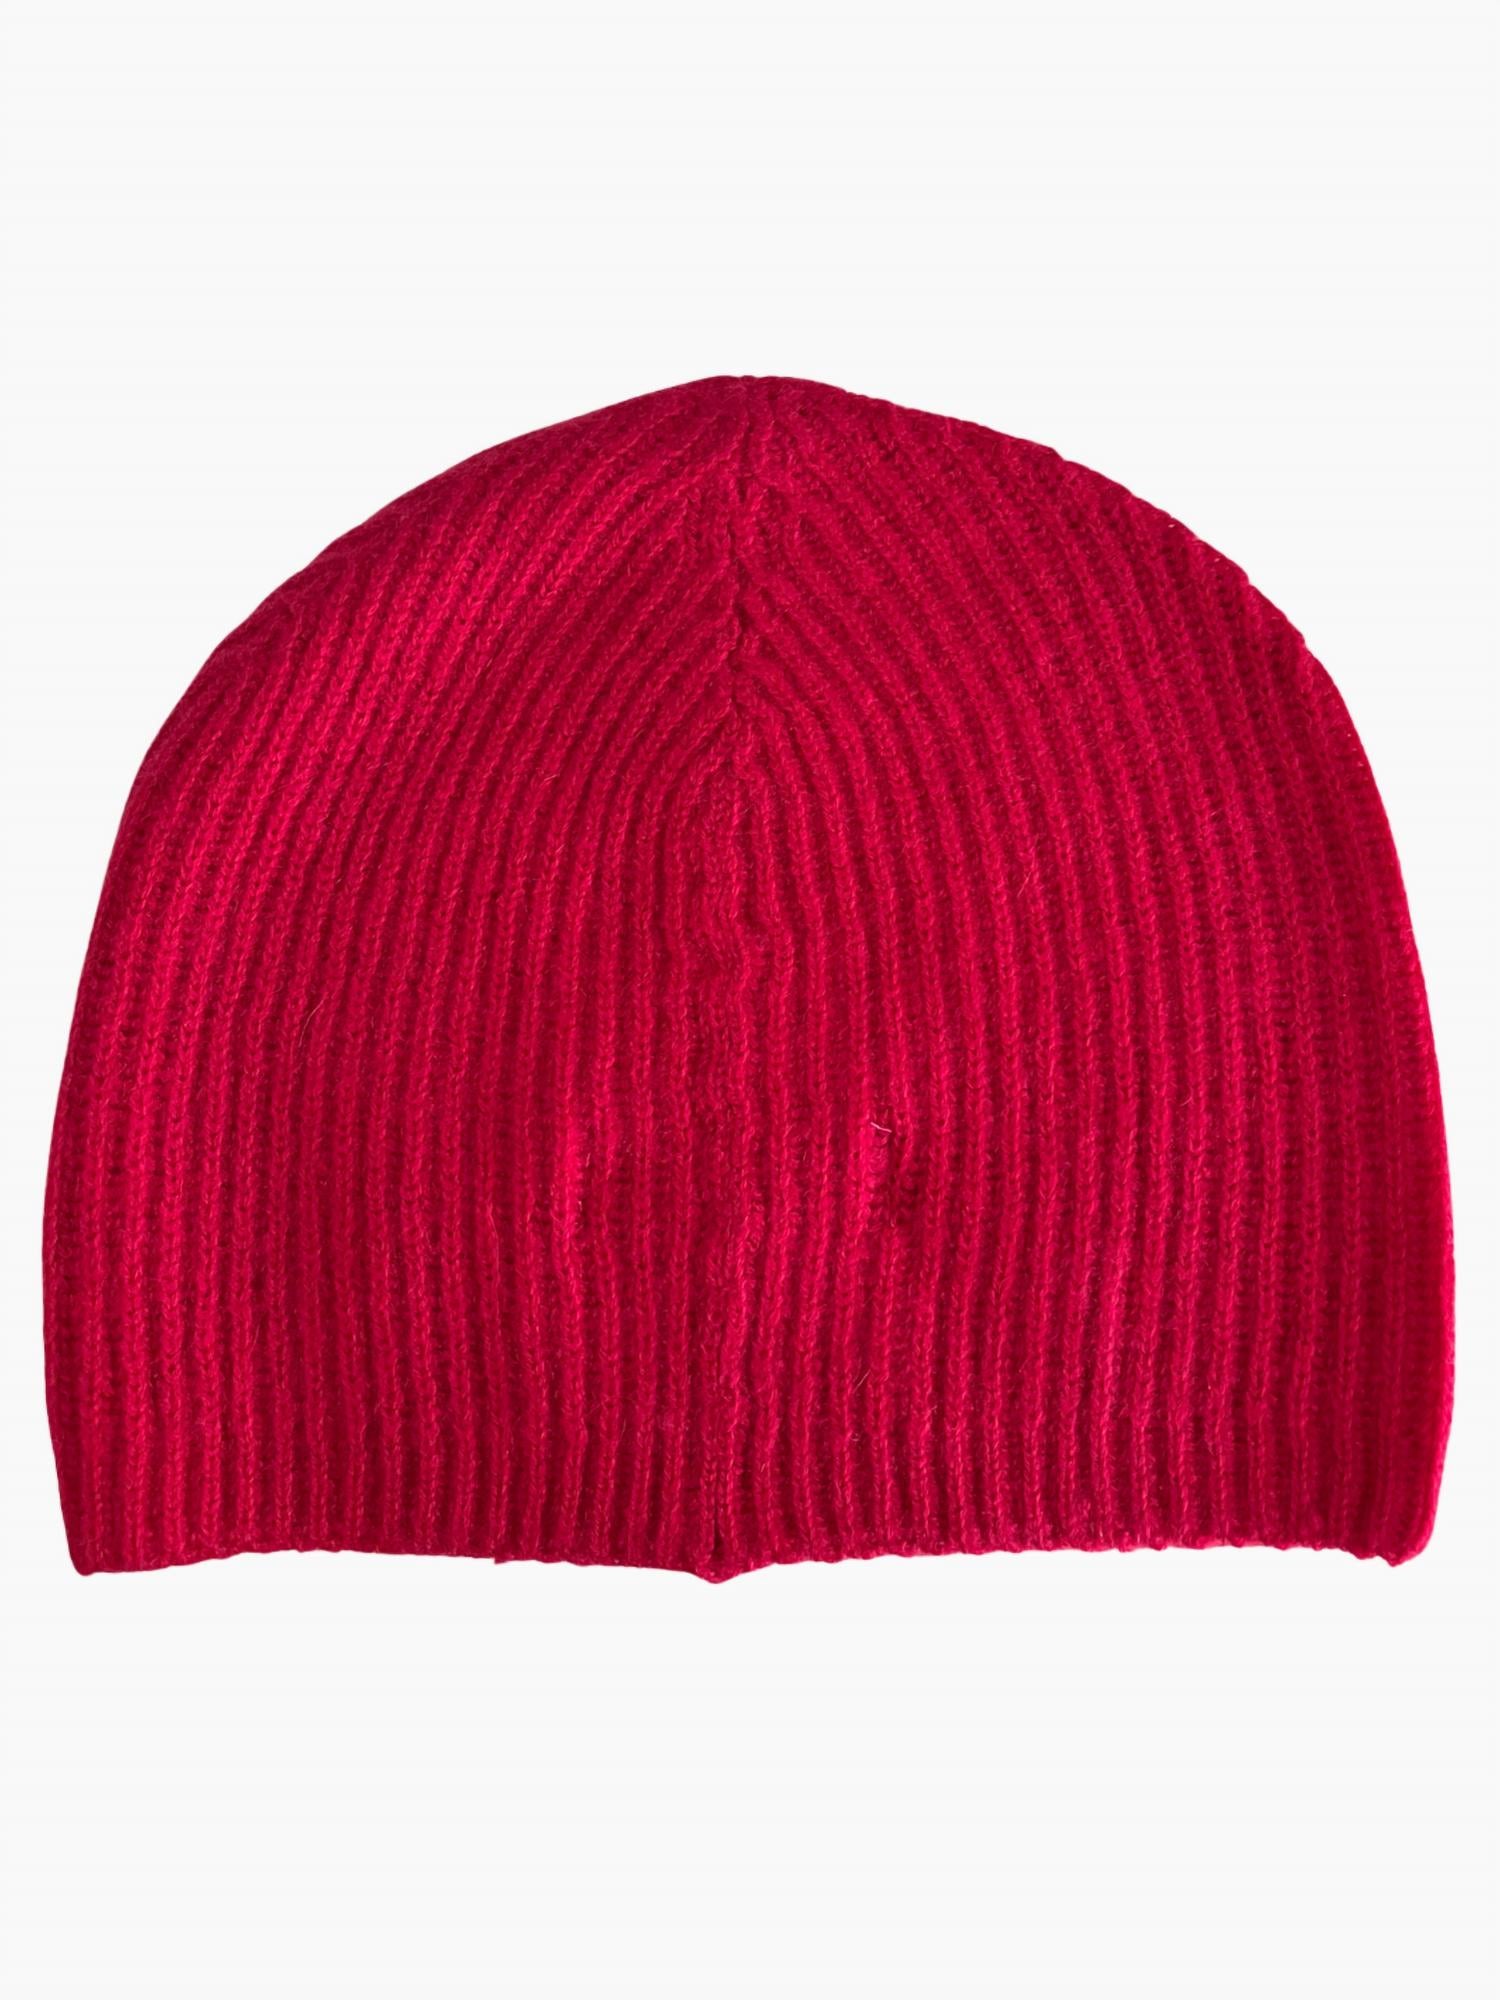 Jumper1234 Women's Ribbed Beanie In Cherry In Red